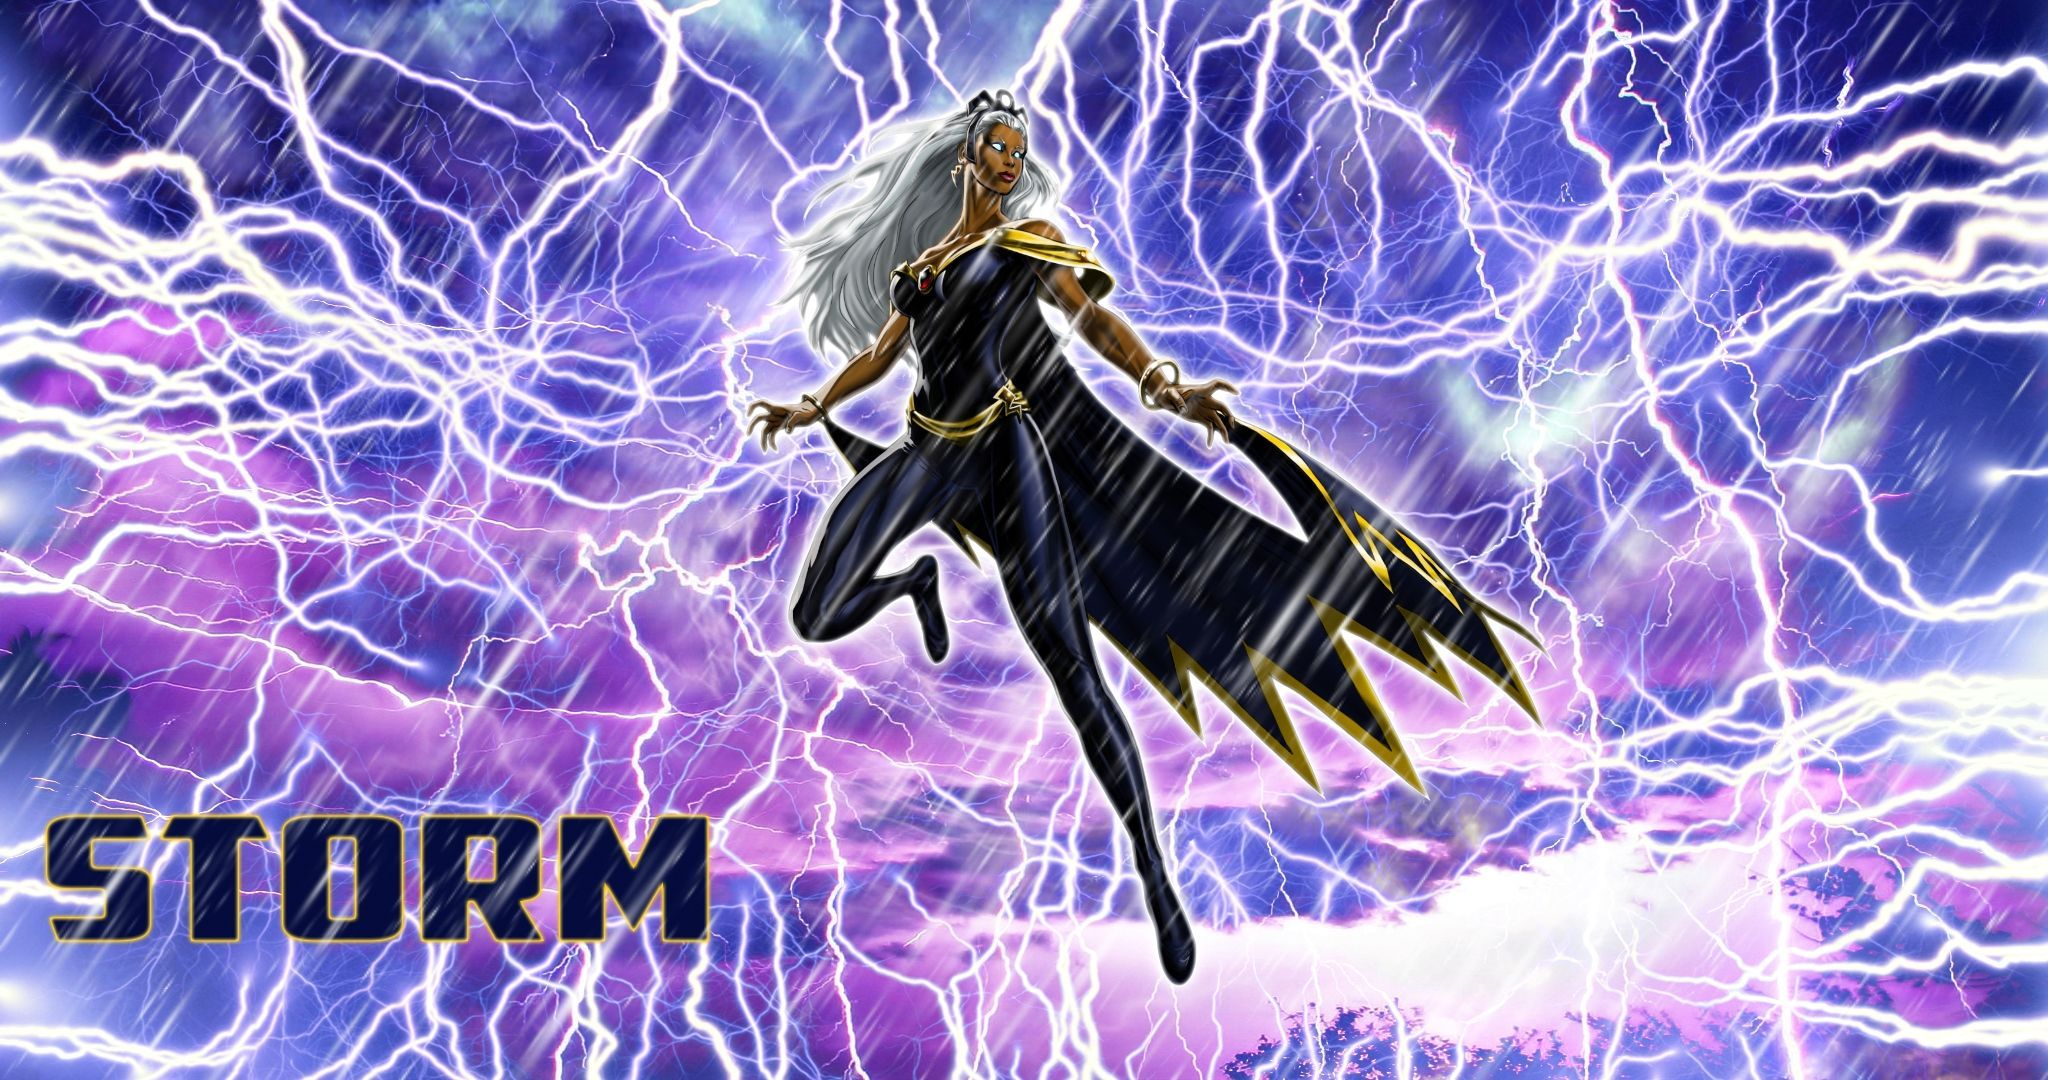 2048x1080 Storm Marvel Wallpapers Top Free Storm Marvel Backgrounds